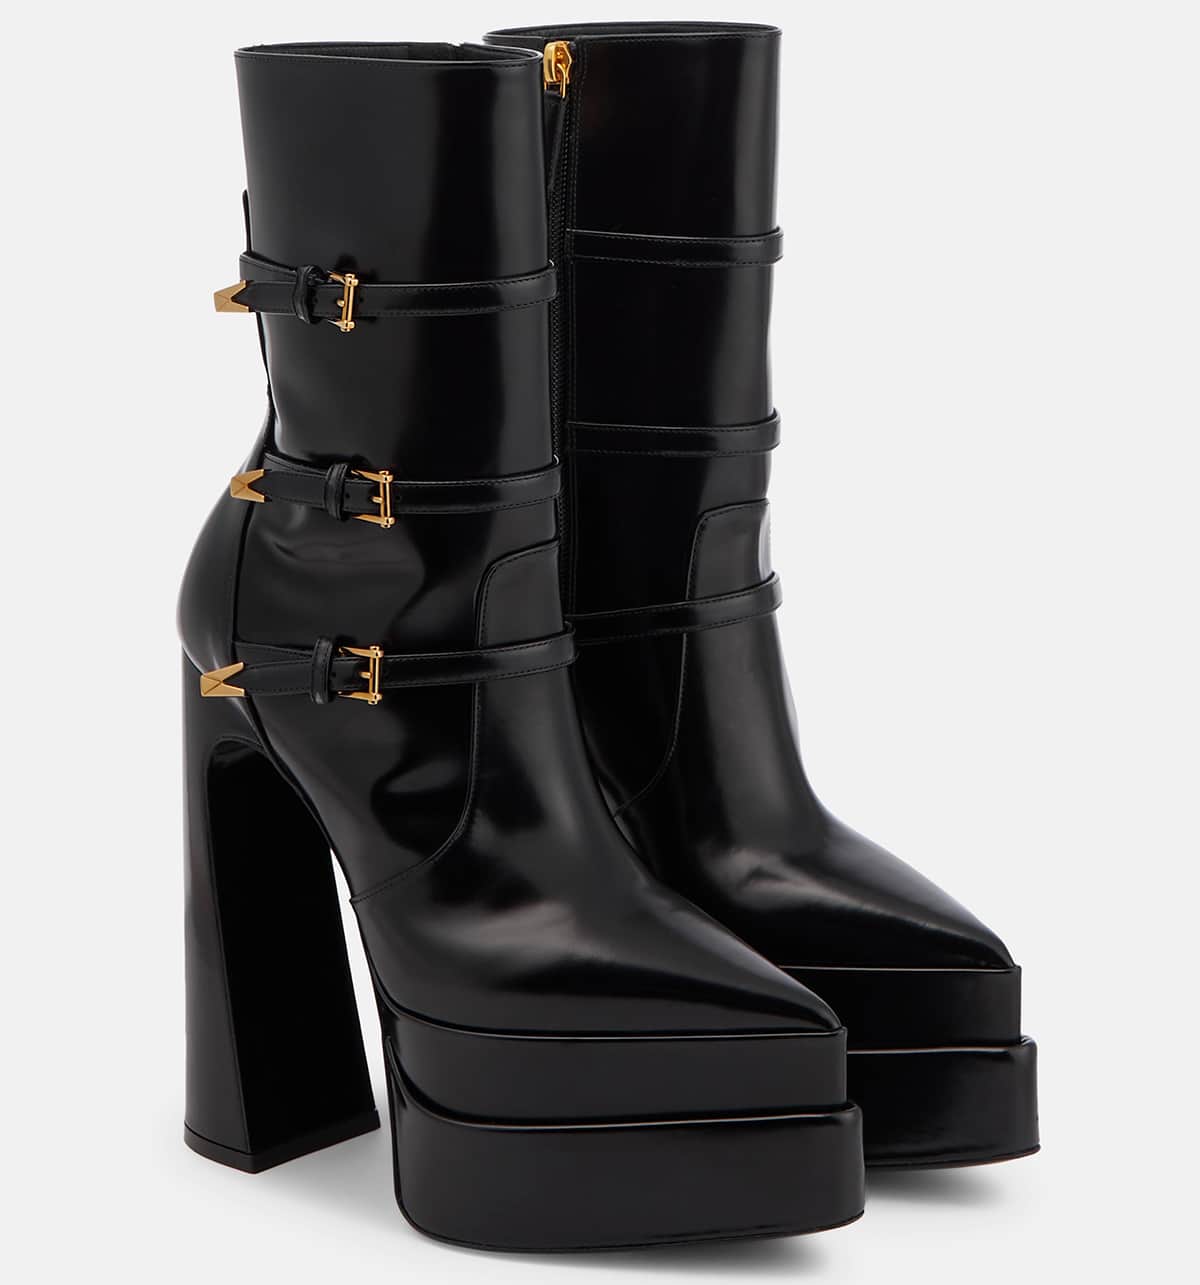 The Versace Aevitas Pointy Ankle Boots have triple buckled straps, double platforms, and slanted block heels